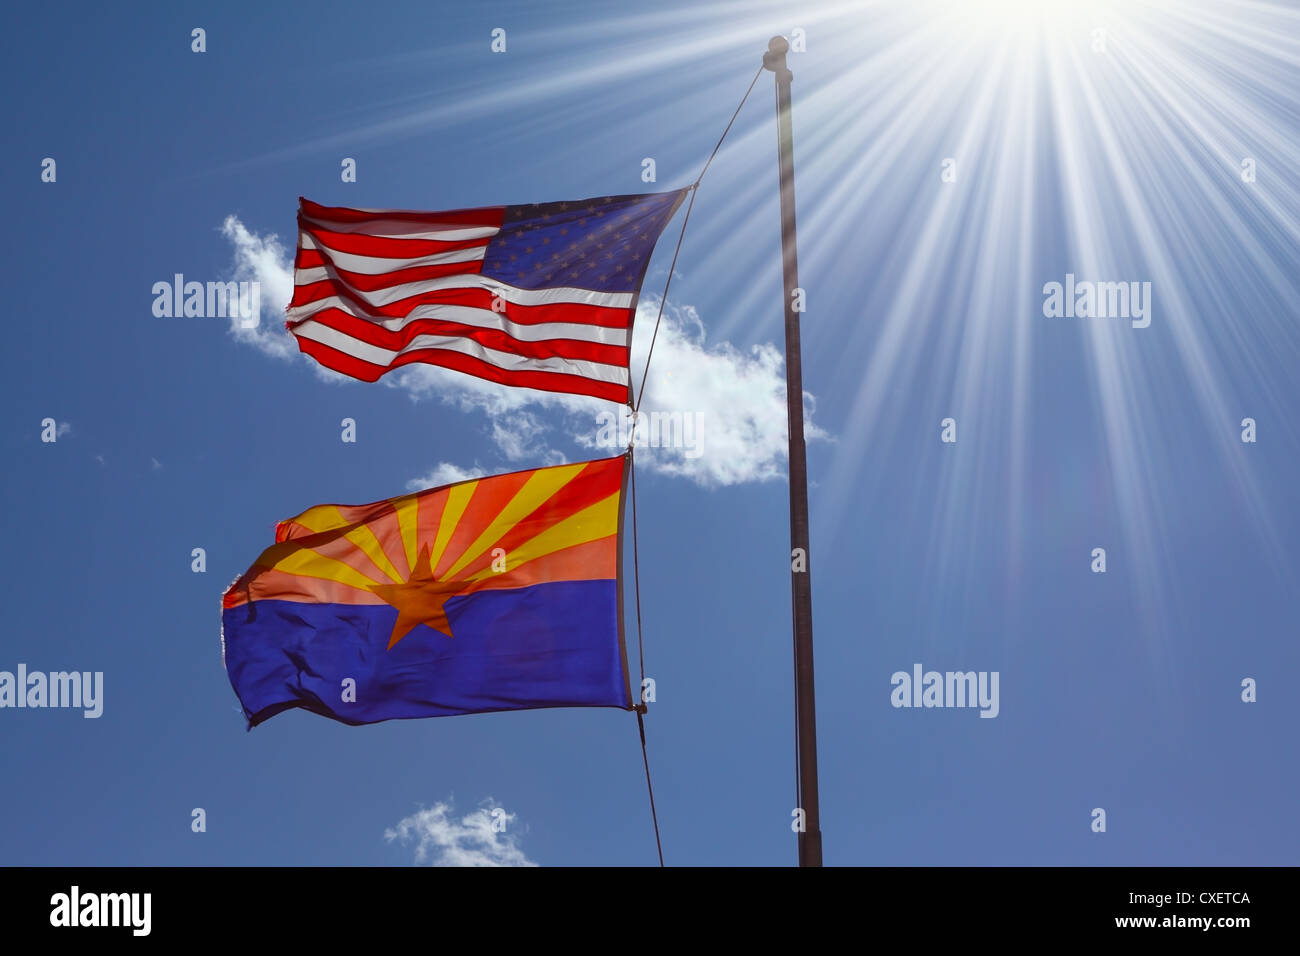 Flags are flying against the shining sun Stock Photo